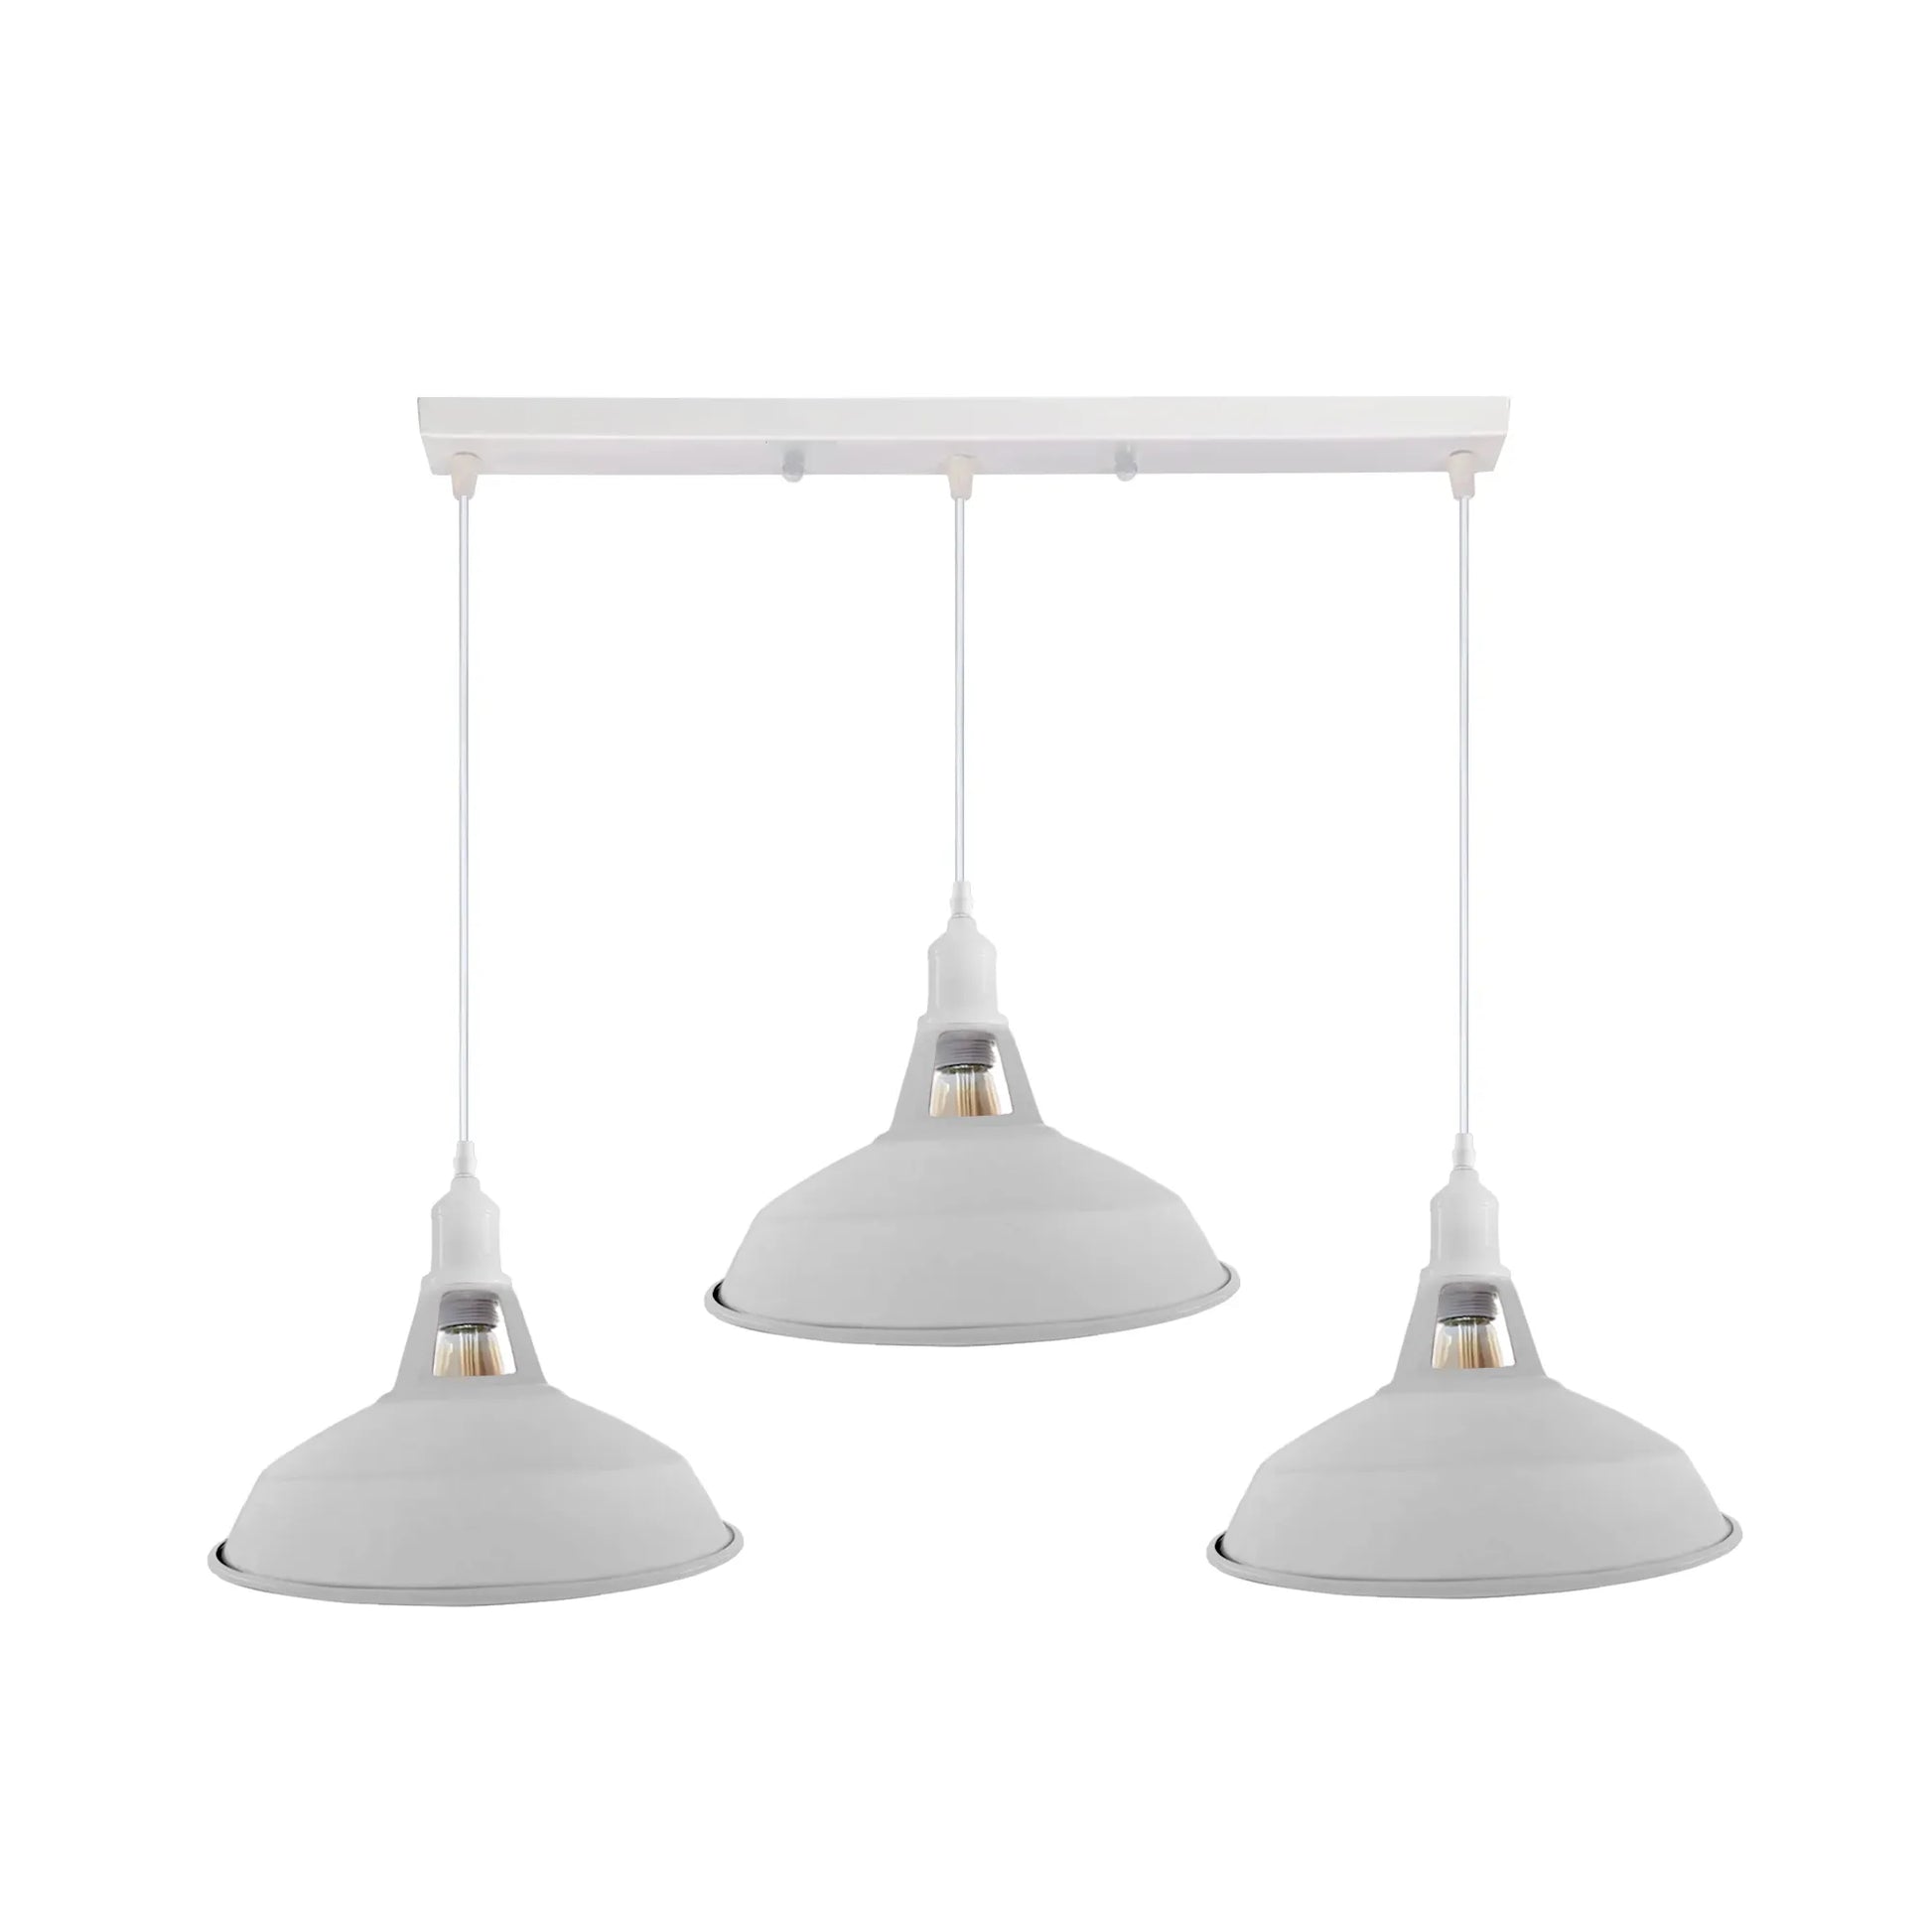 3 Way Ceiling Barn Slotted E27 Metal Pendent Light Fixture 